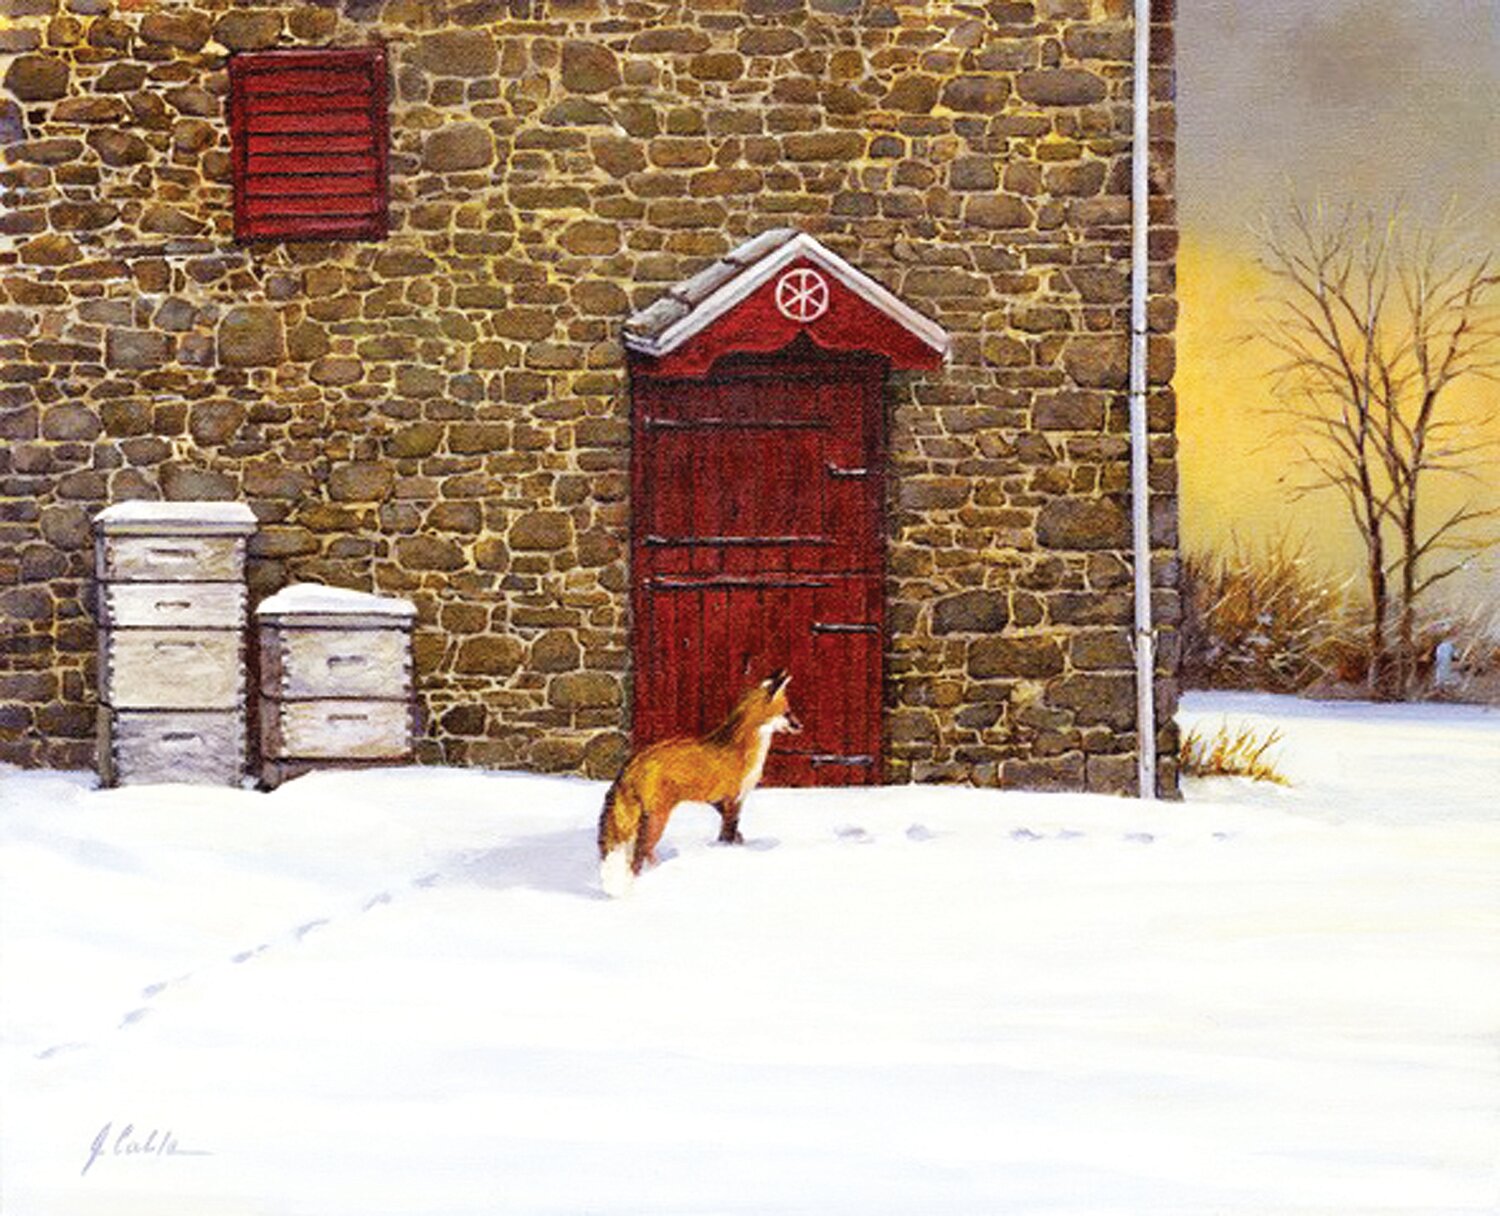 “Outfoxed” is by Bucks County artist Jerry Cable. From 19th Century European impressionists Claude Monet and Camille Pissarro to his first art instructor in Minerva, Ohio, Cable’s influences are an eclectic mix.